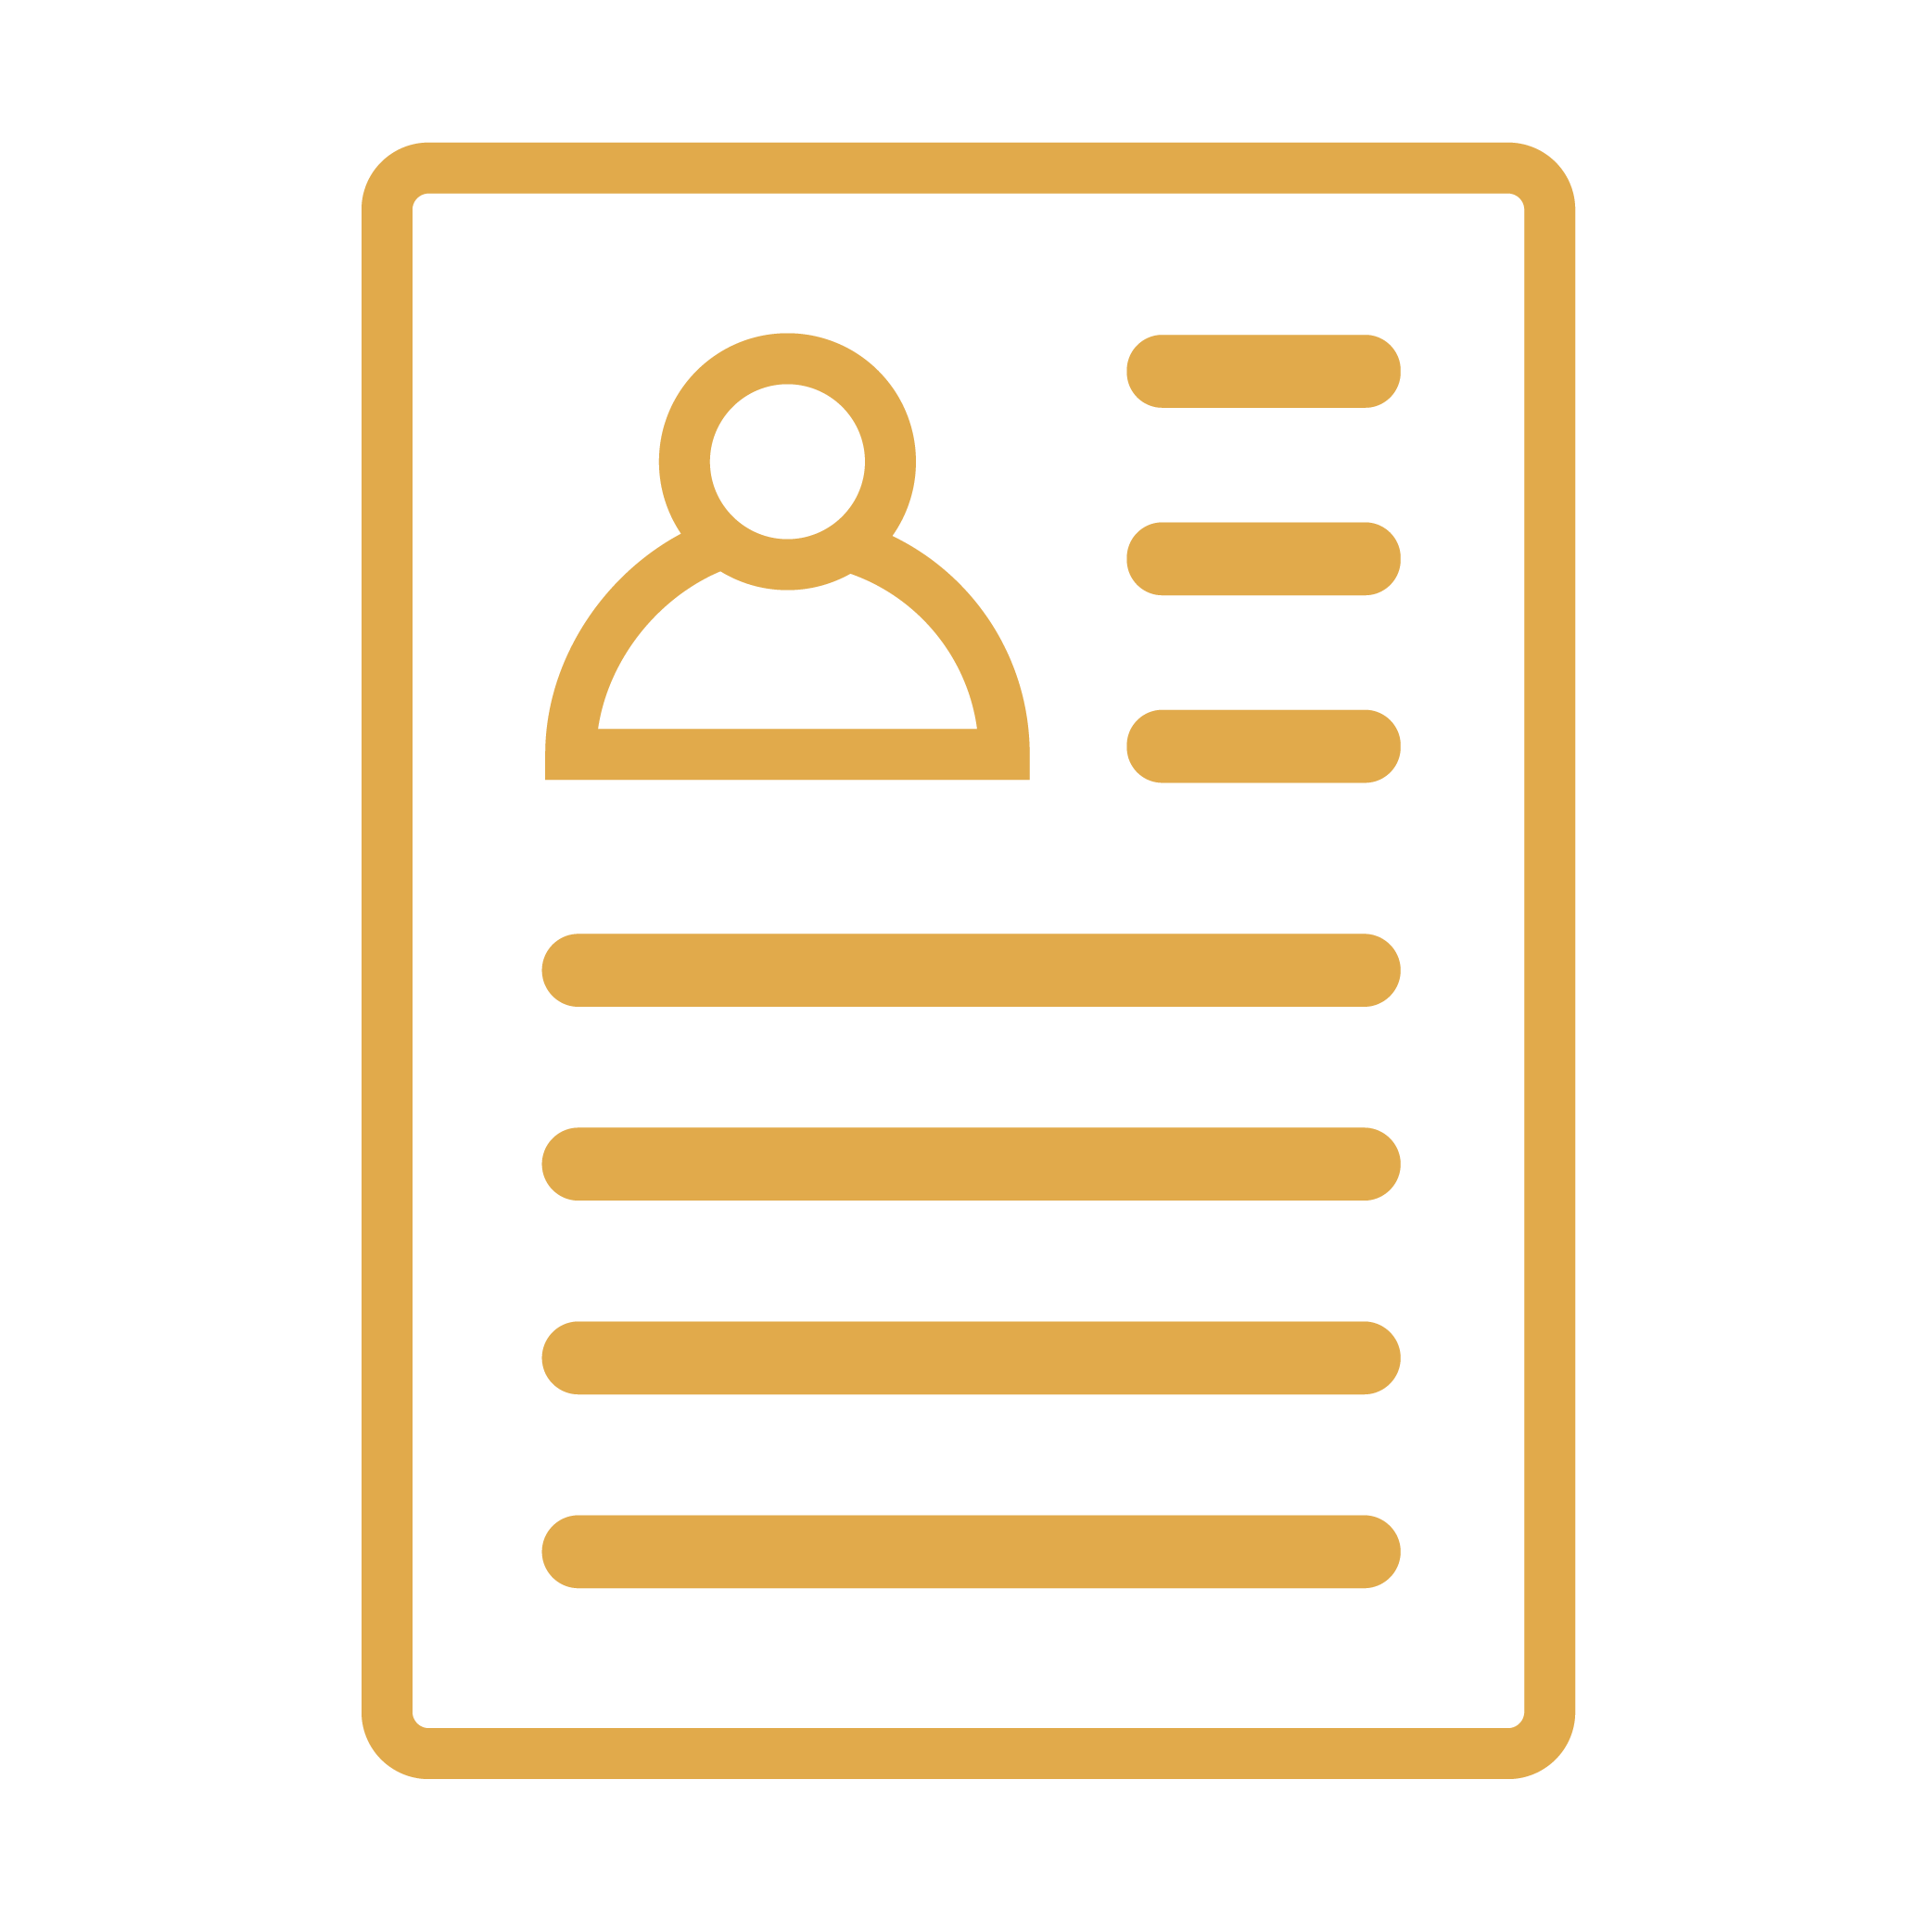 yellow icon of a piece of paper with written content